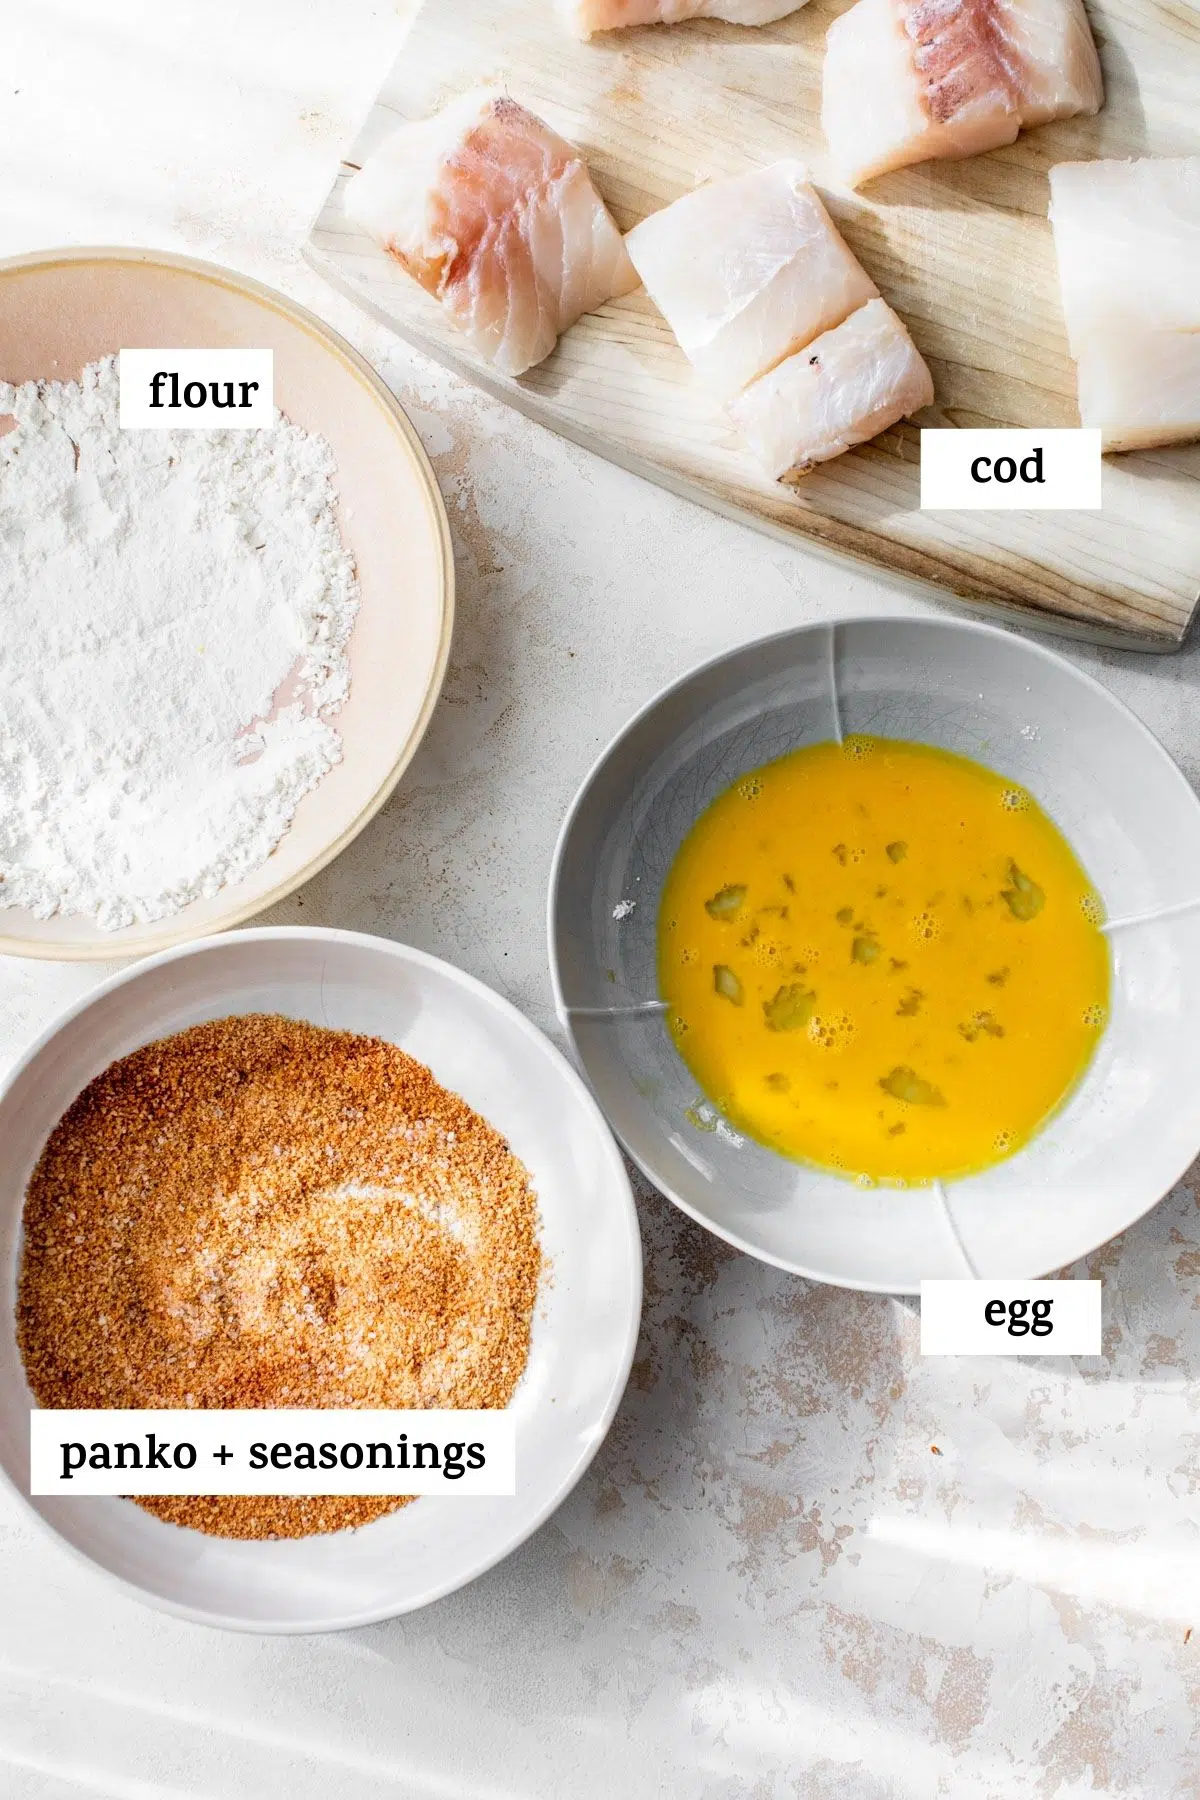 ingredients to make a cod sandwich, like cod fillets and breadcrumbs